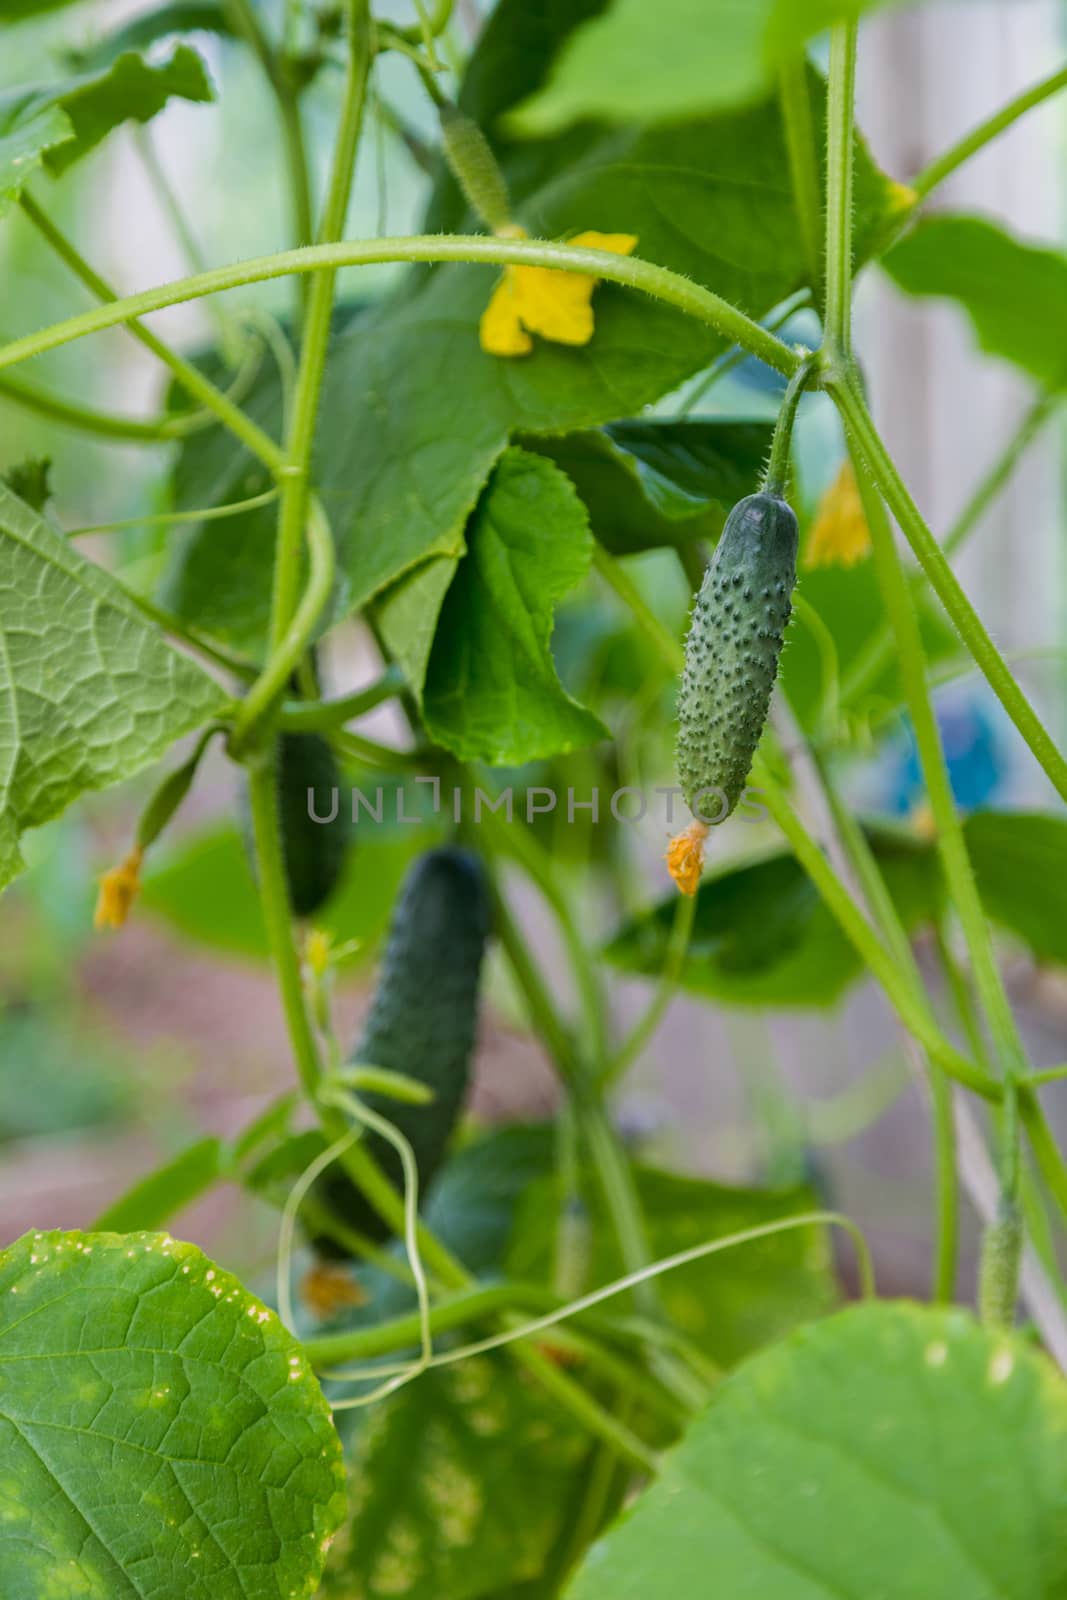 Green cucumber on a branch with yellow flowers.